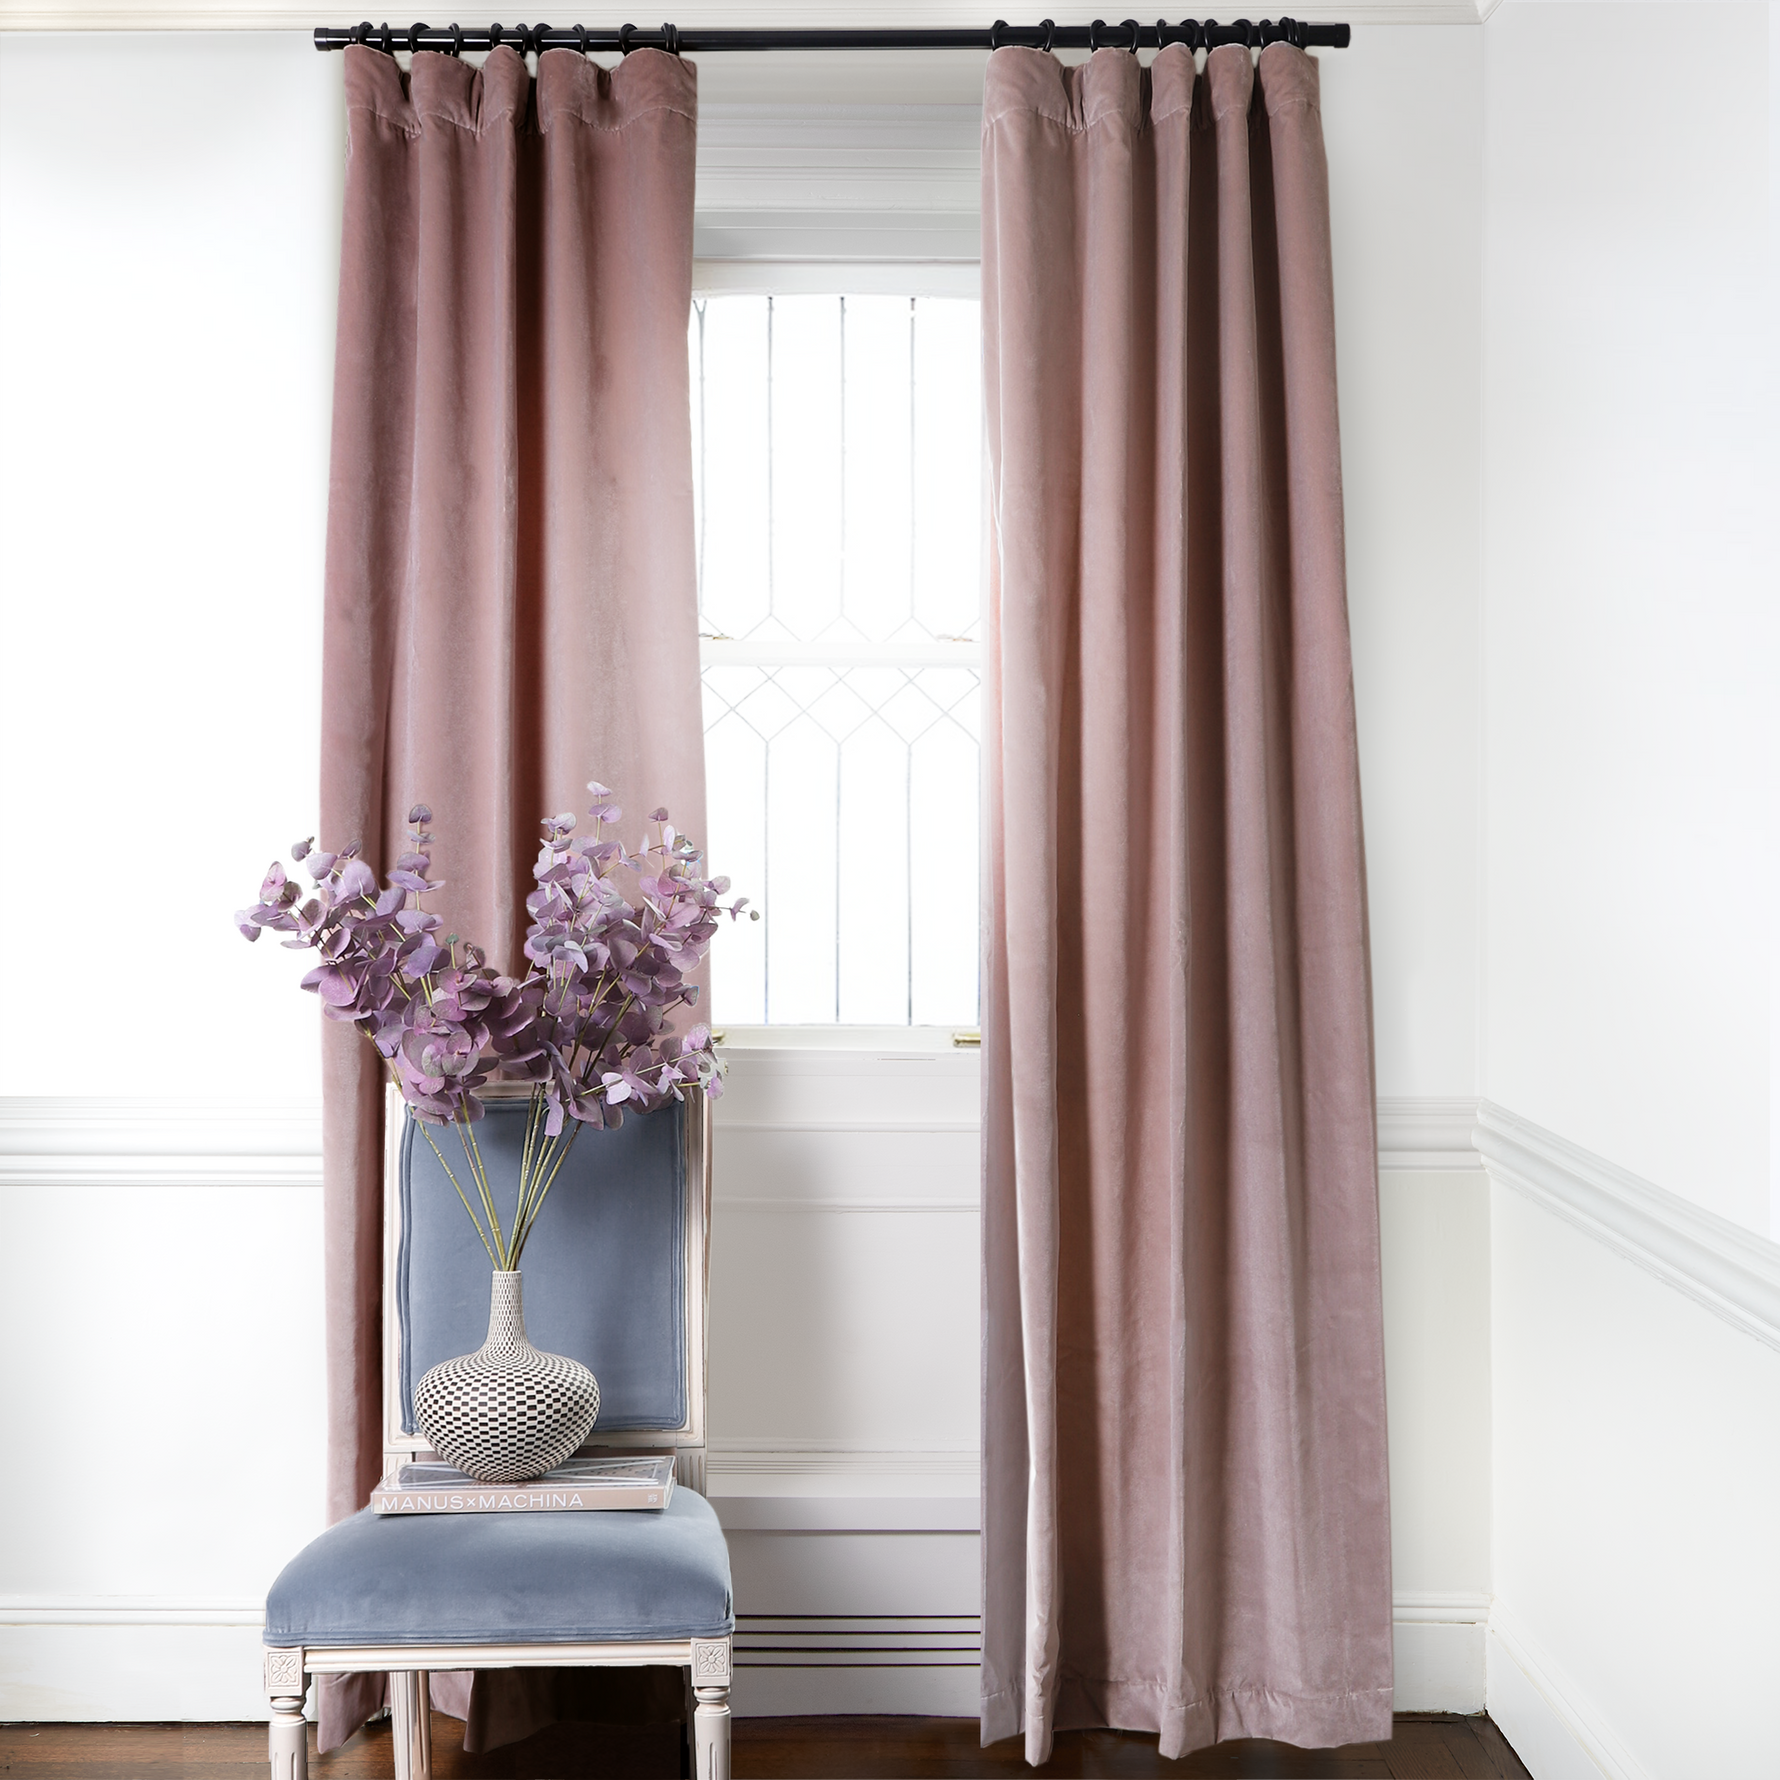 Mauve Velvet Curtains on metal rod in front of an illuminated window with Sky Blue Velvet chair with purple flowers in white and black vase on top book